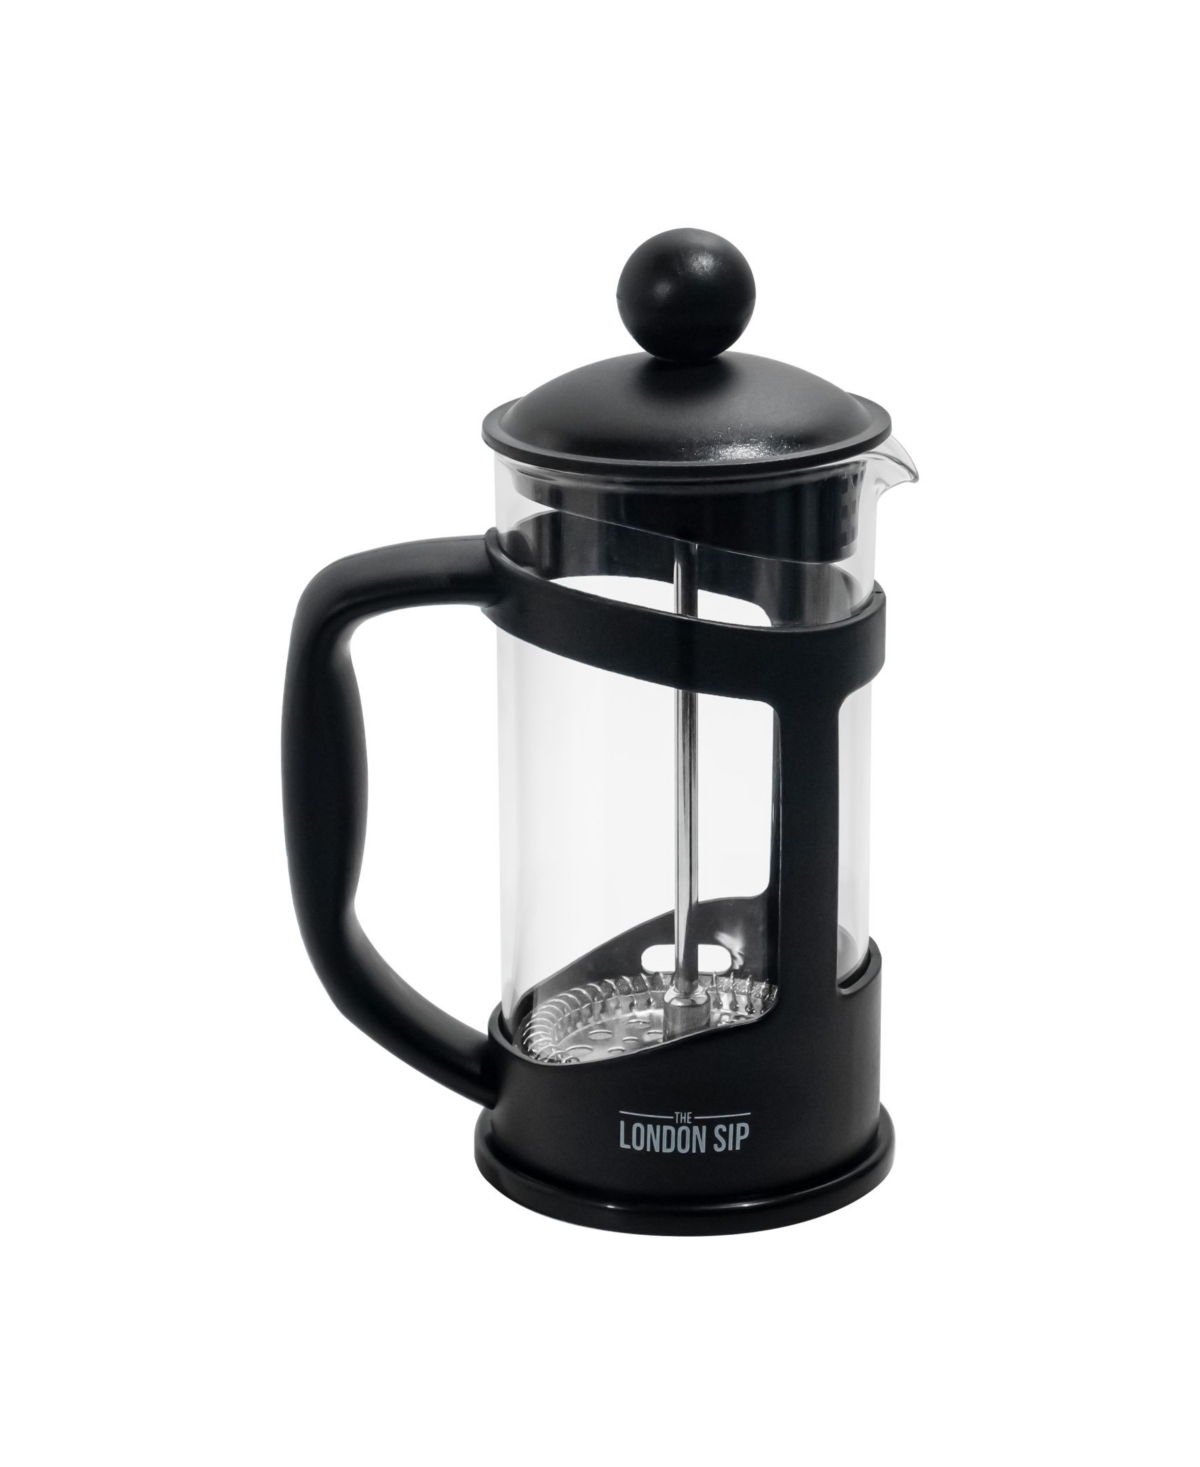 London Sip French Press Immersion Brewer, 350ml In Black